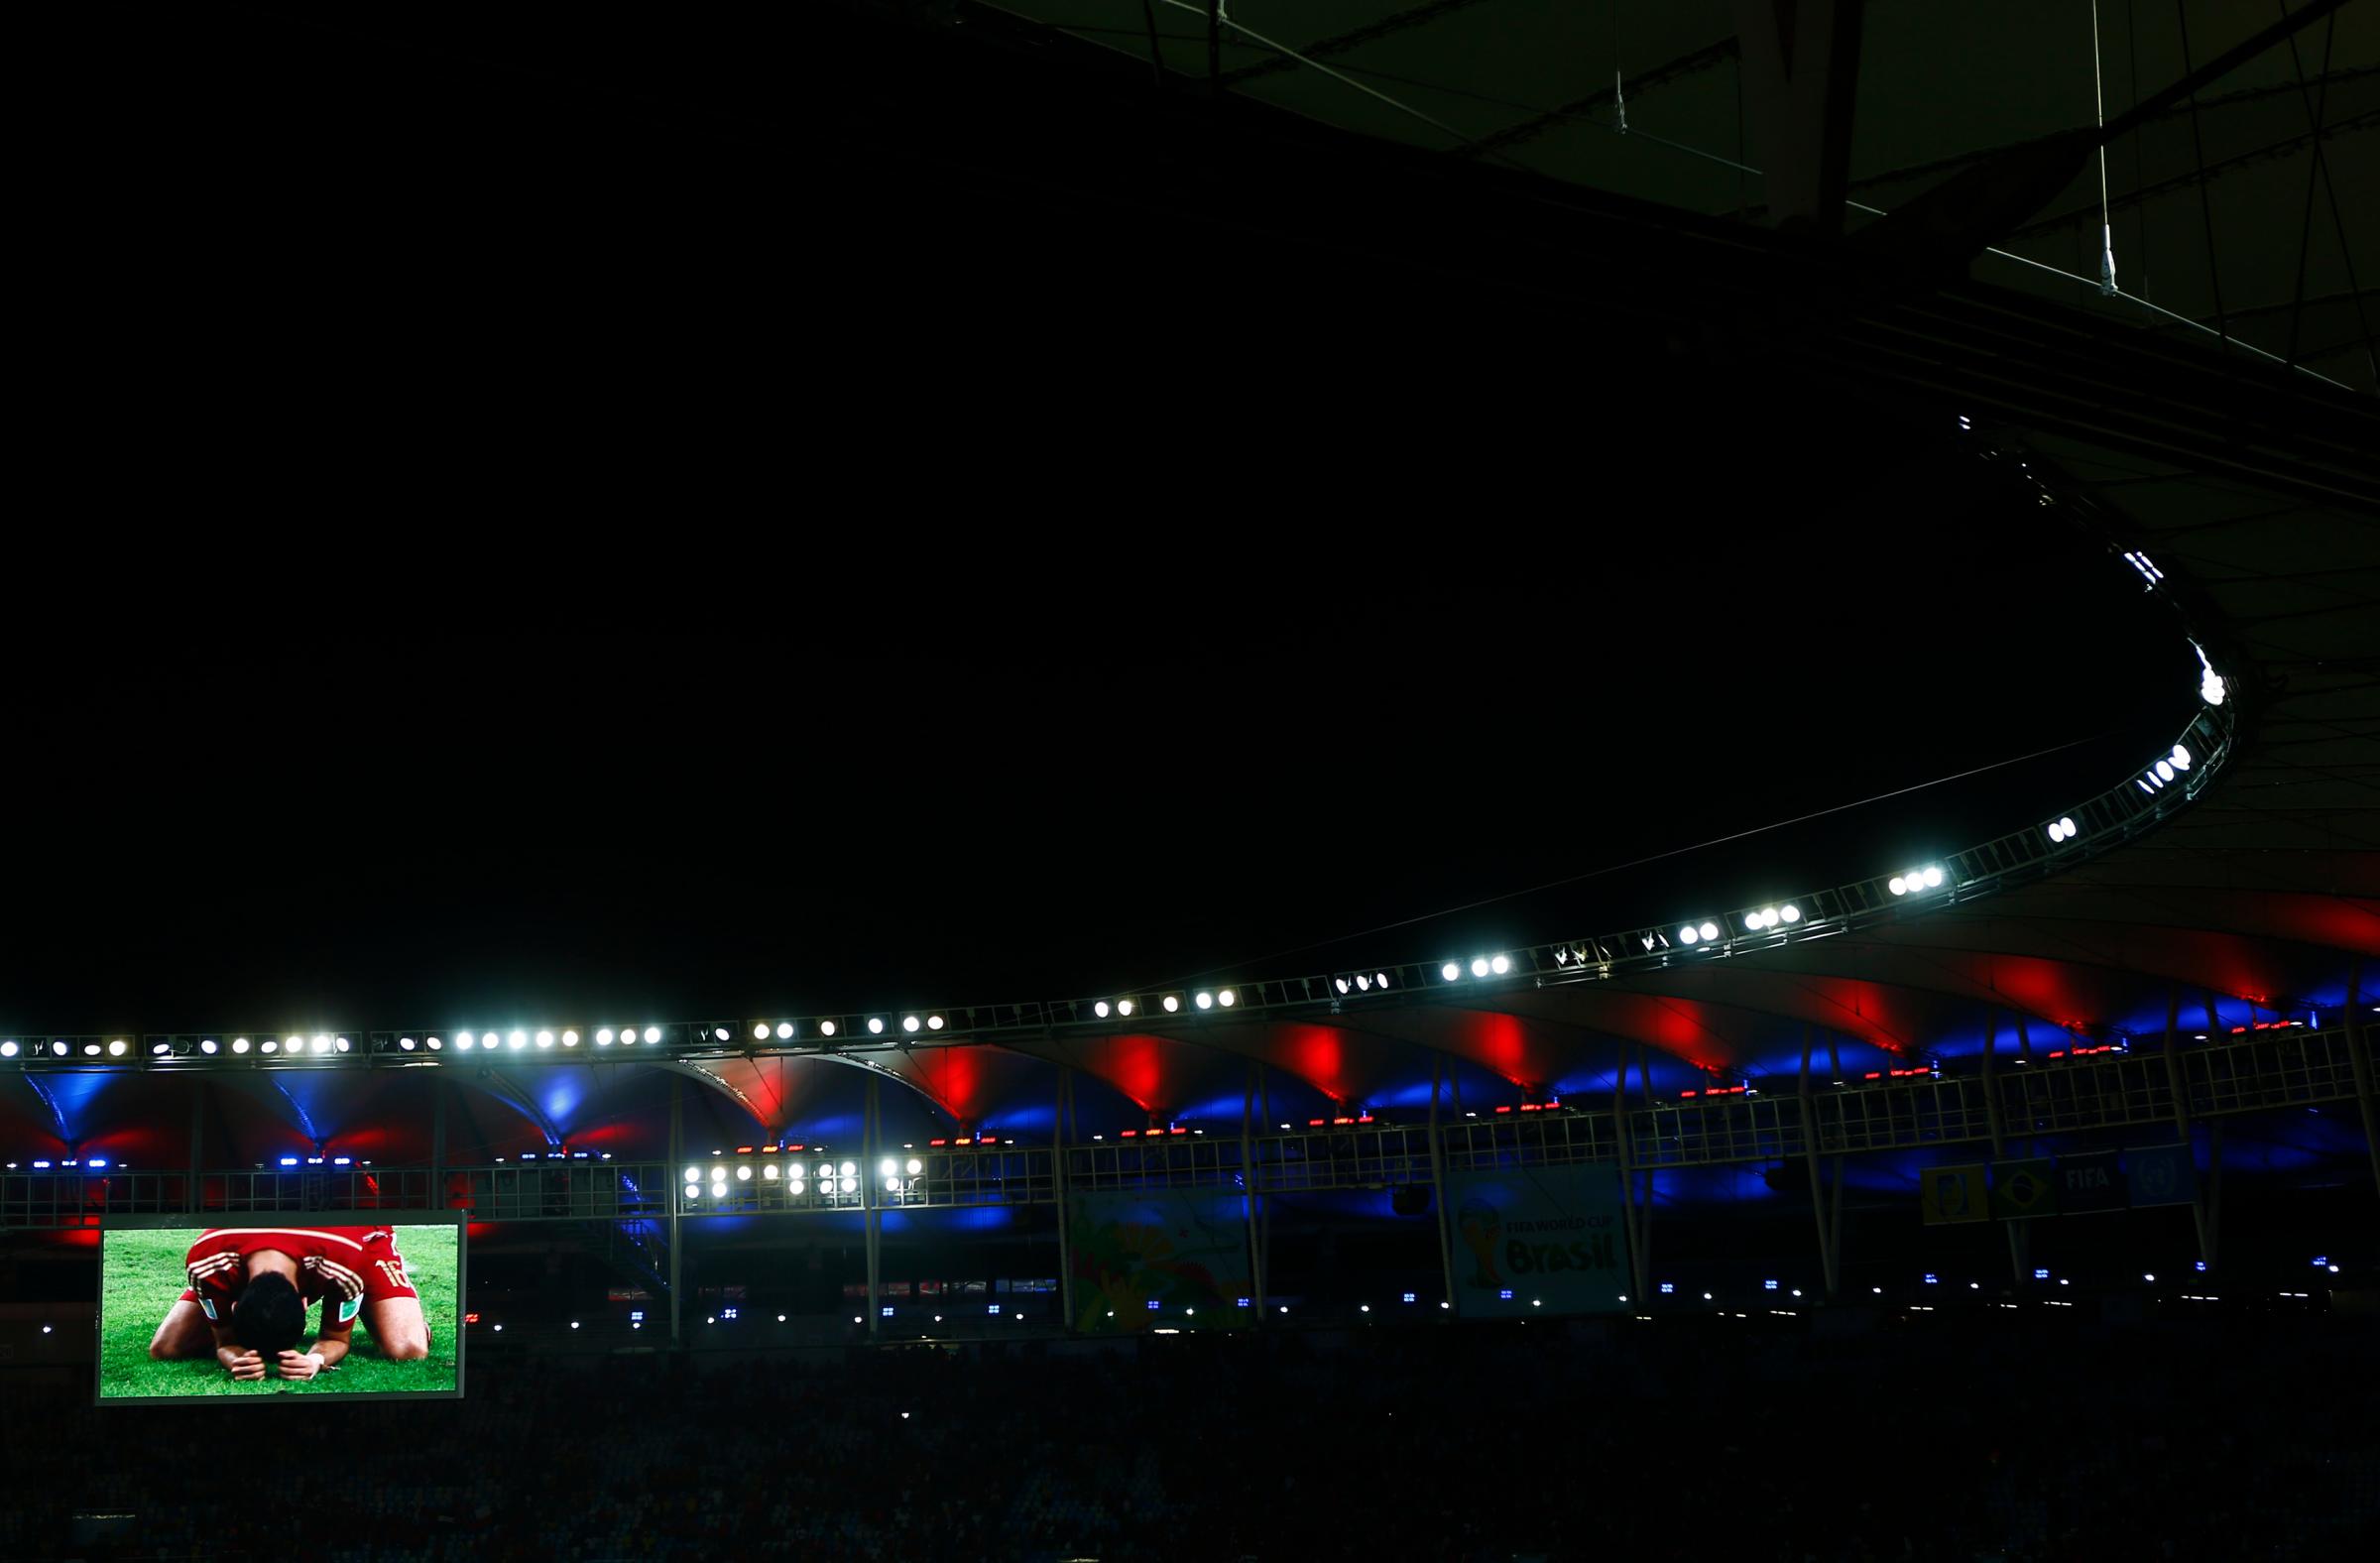 Match highlights are screened after the 2014 World Cup Group B soccer match between Spain and Chile at the Maracana stadium in Rio de Janeiro on June 18, 2014.